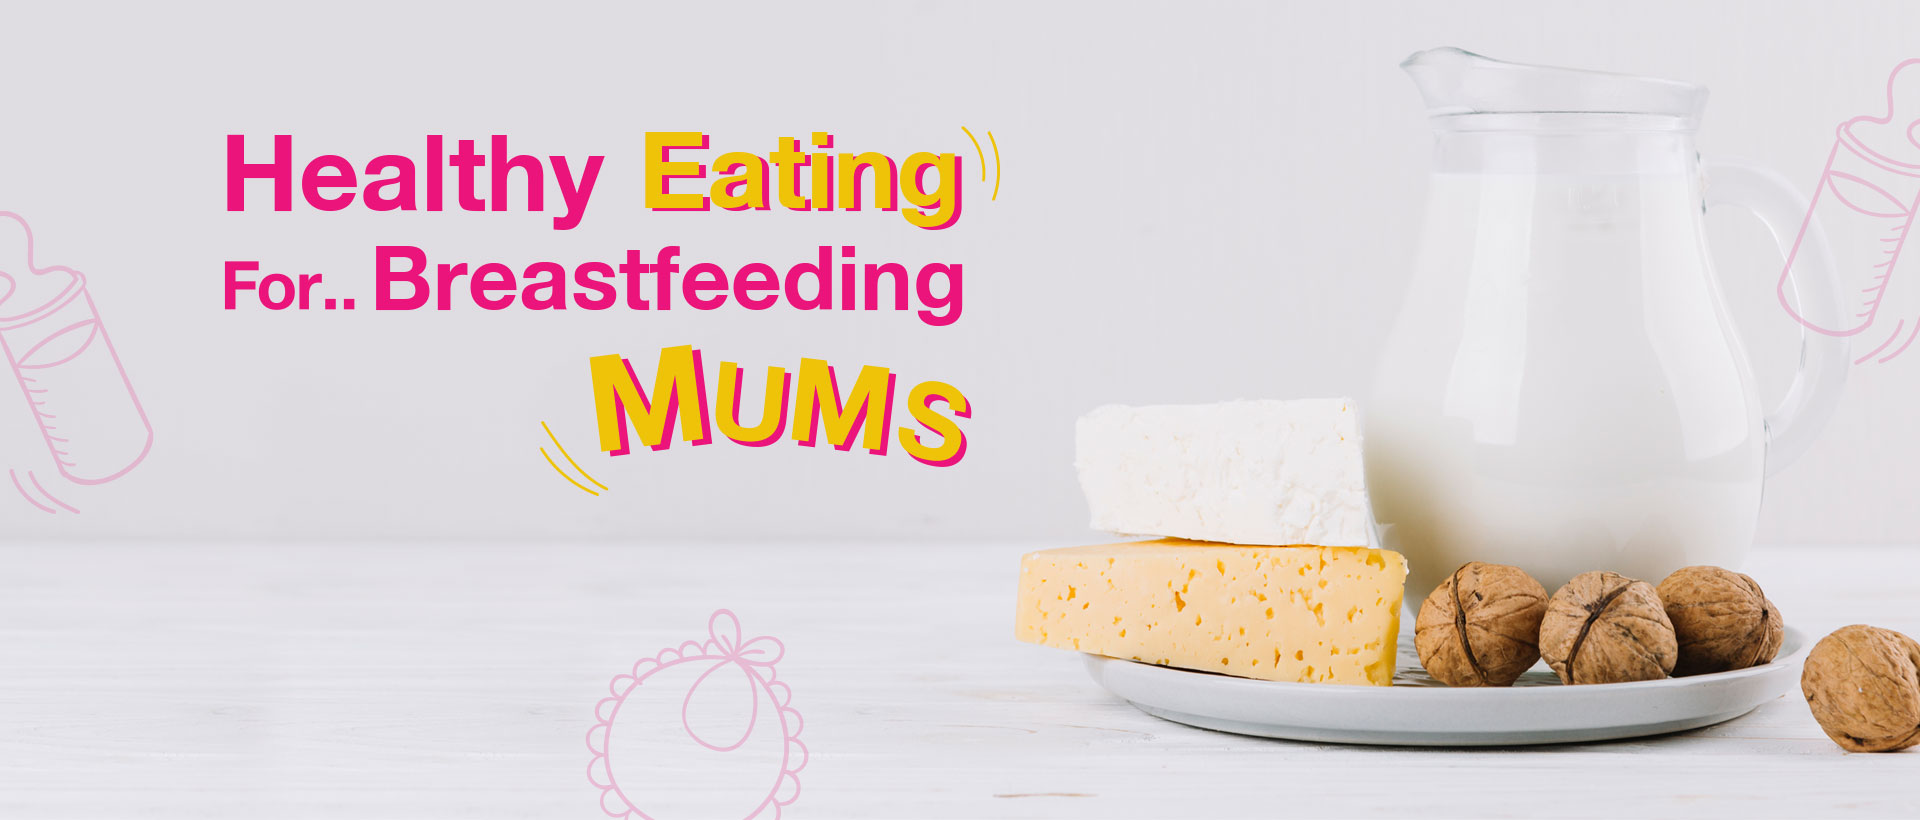 Healthy eating for breastfeeding mums